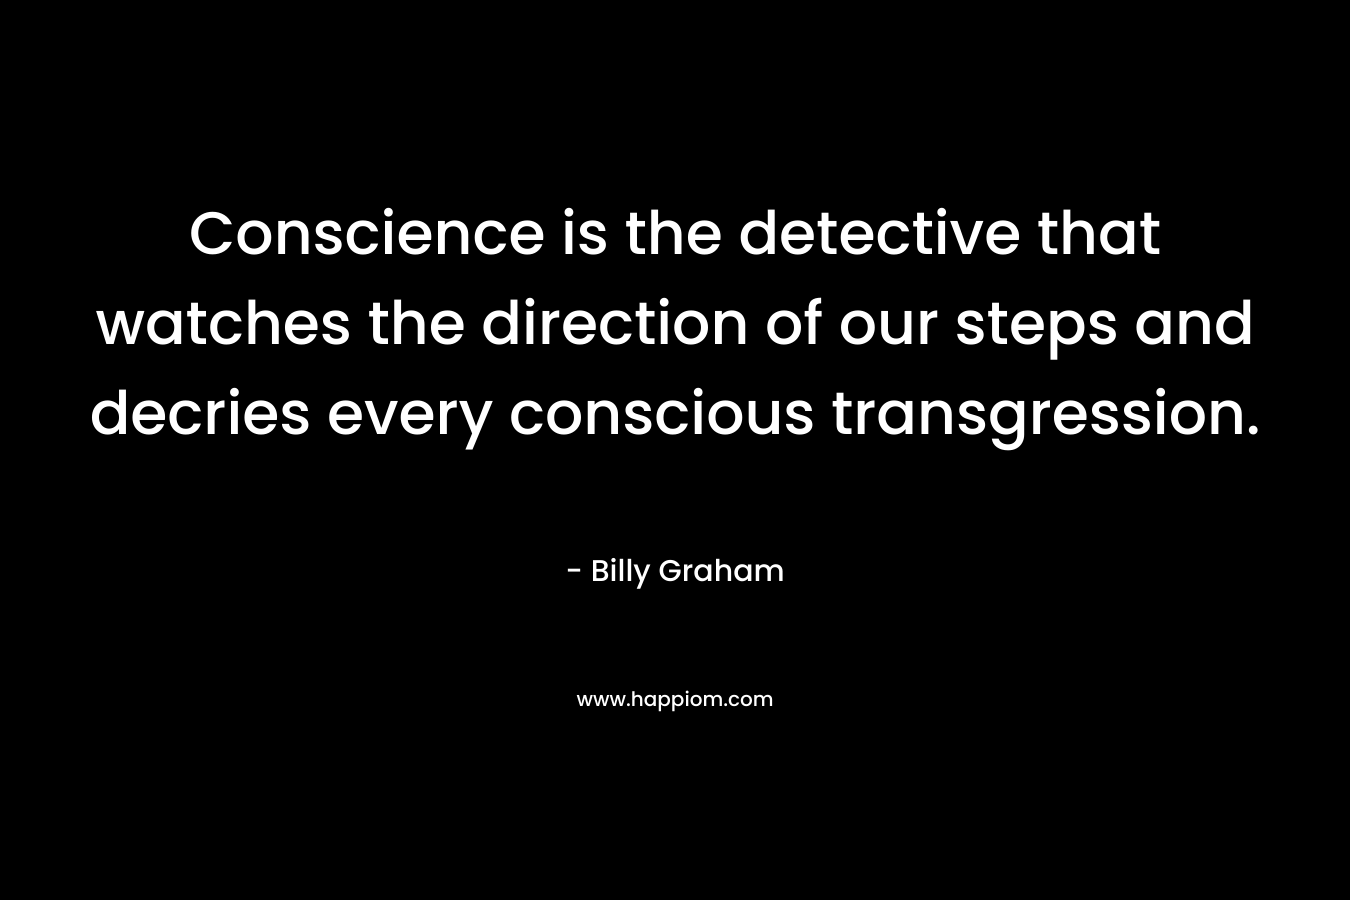 Conscience is the detective that watches the direction of our steps and decries every conscious transgression.